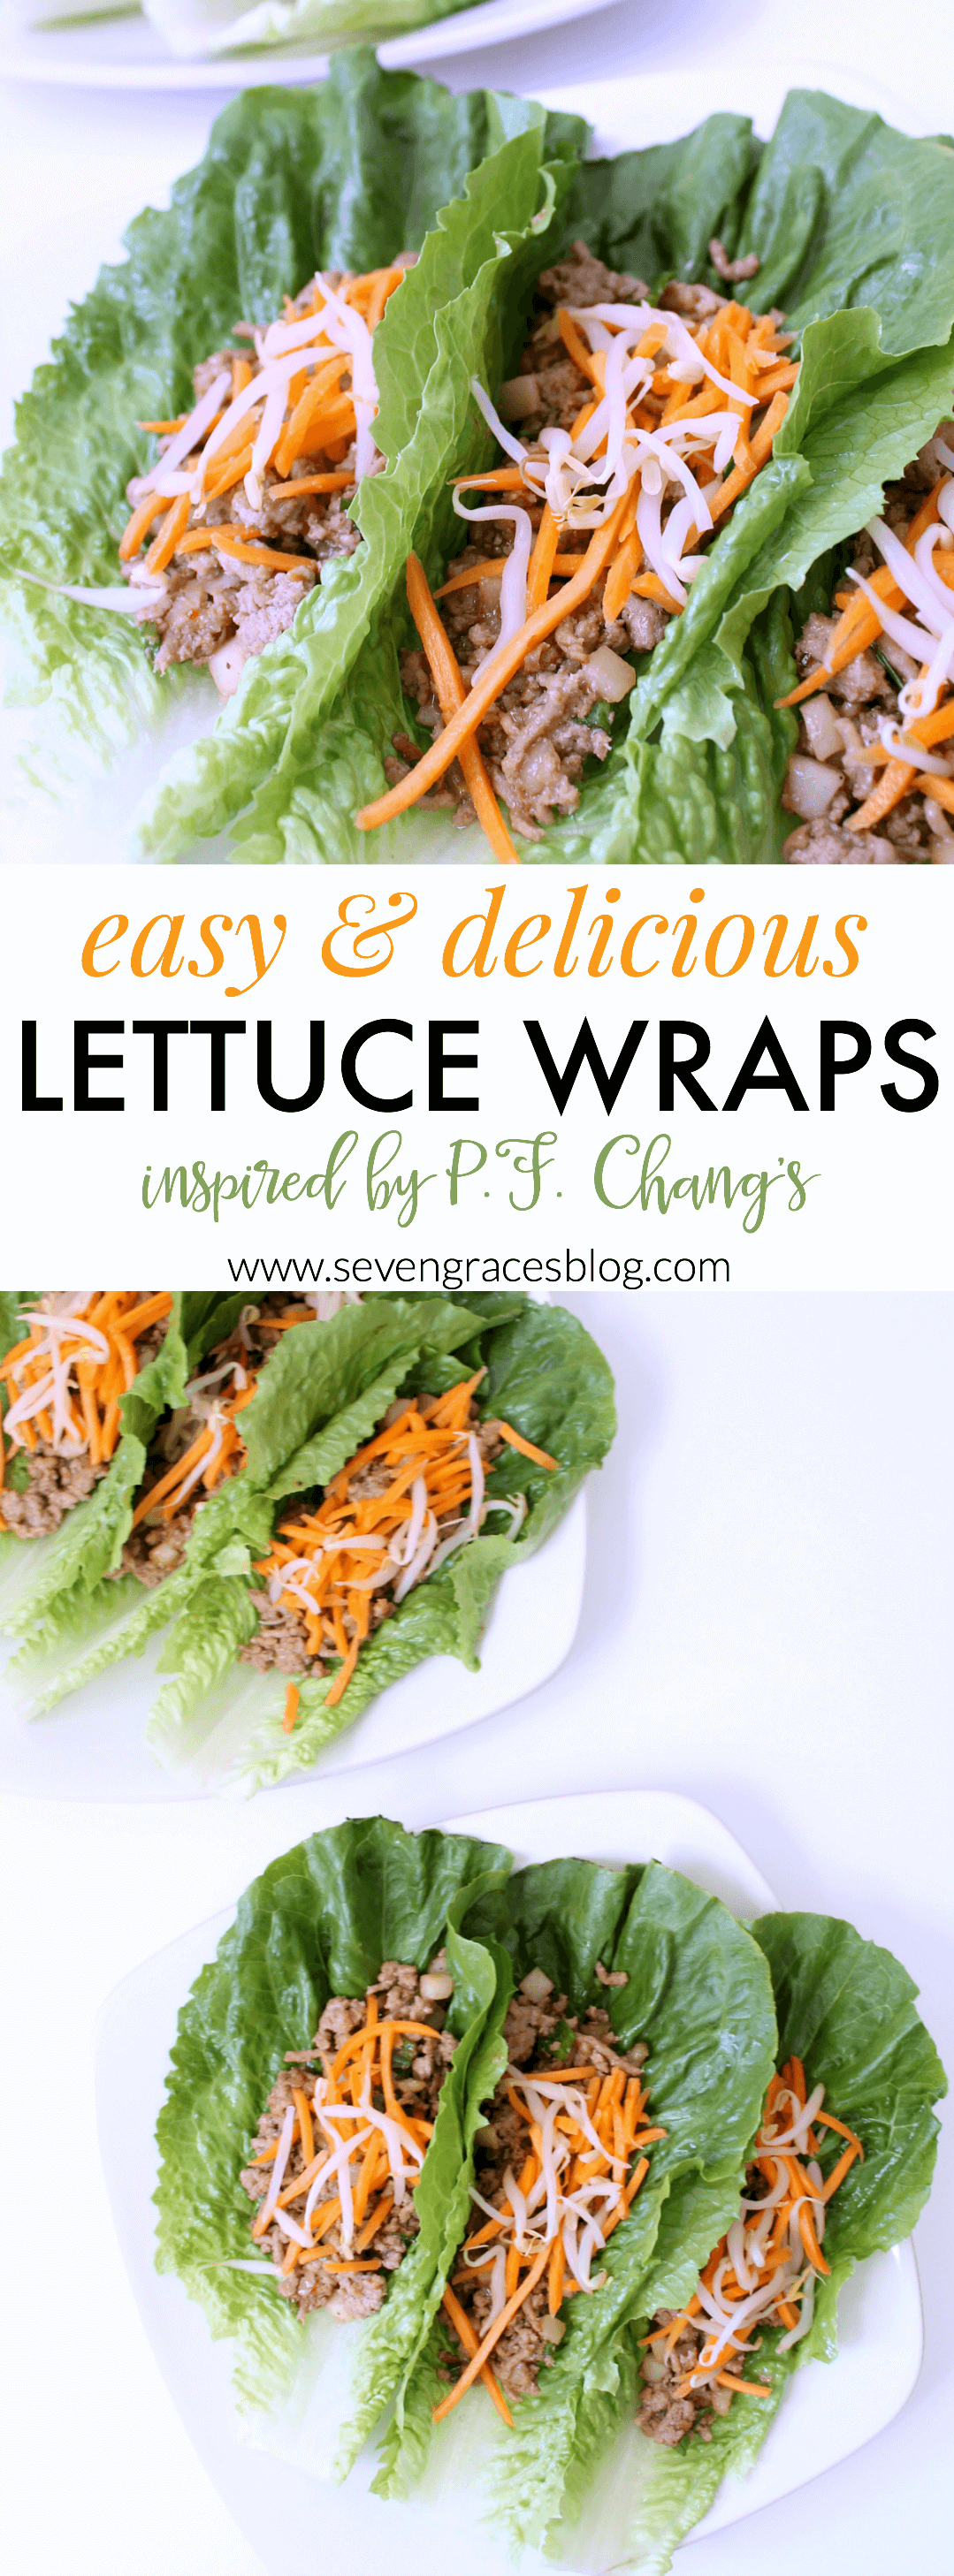 The easiest and most delicious lettuce wraps. The best 20-minute meal I've ever made with minimal ingredients. This P.F. Chang's inspired lettuce wrap recipe is sure to be winner in your house!